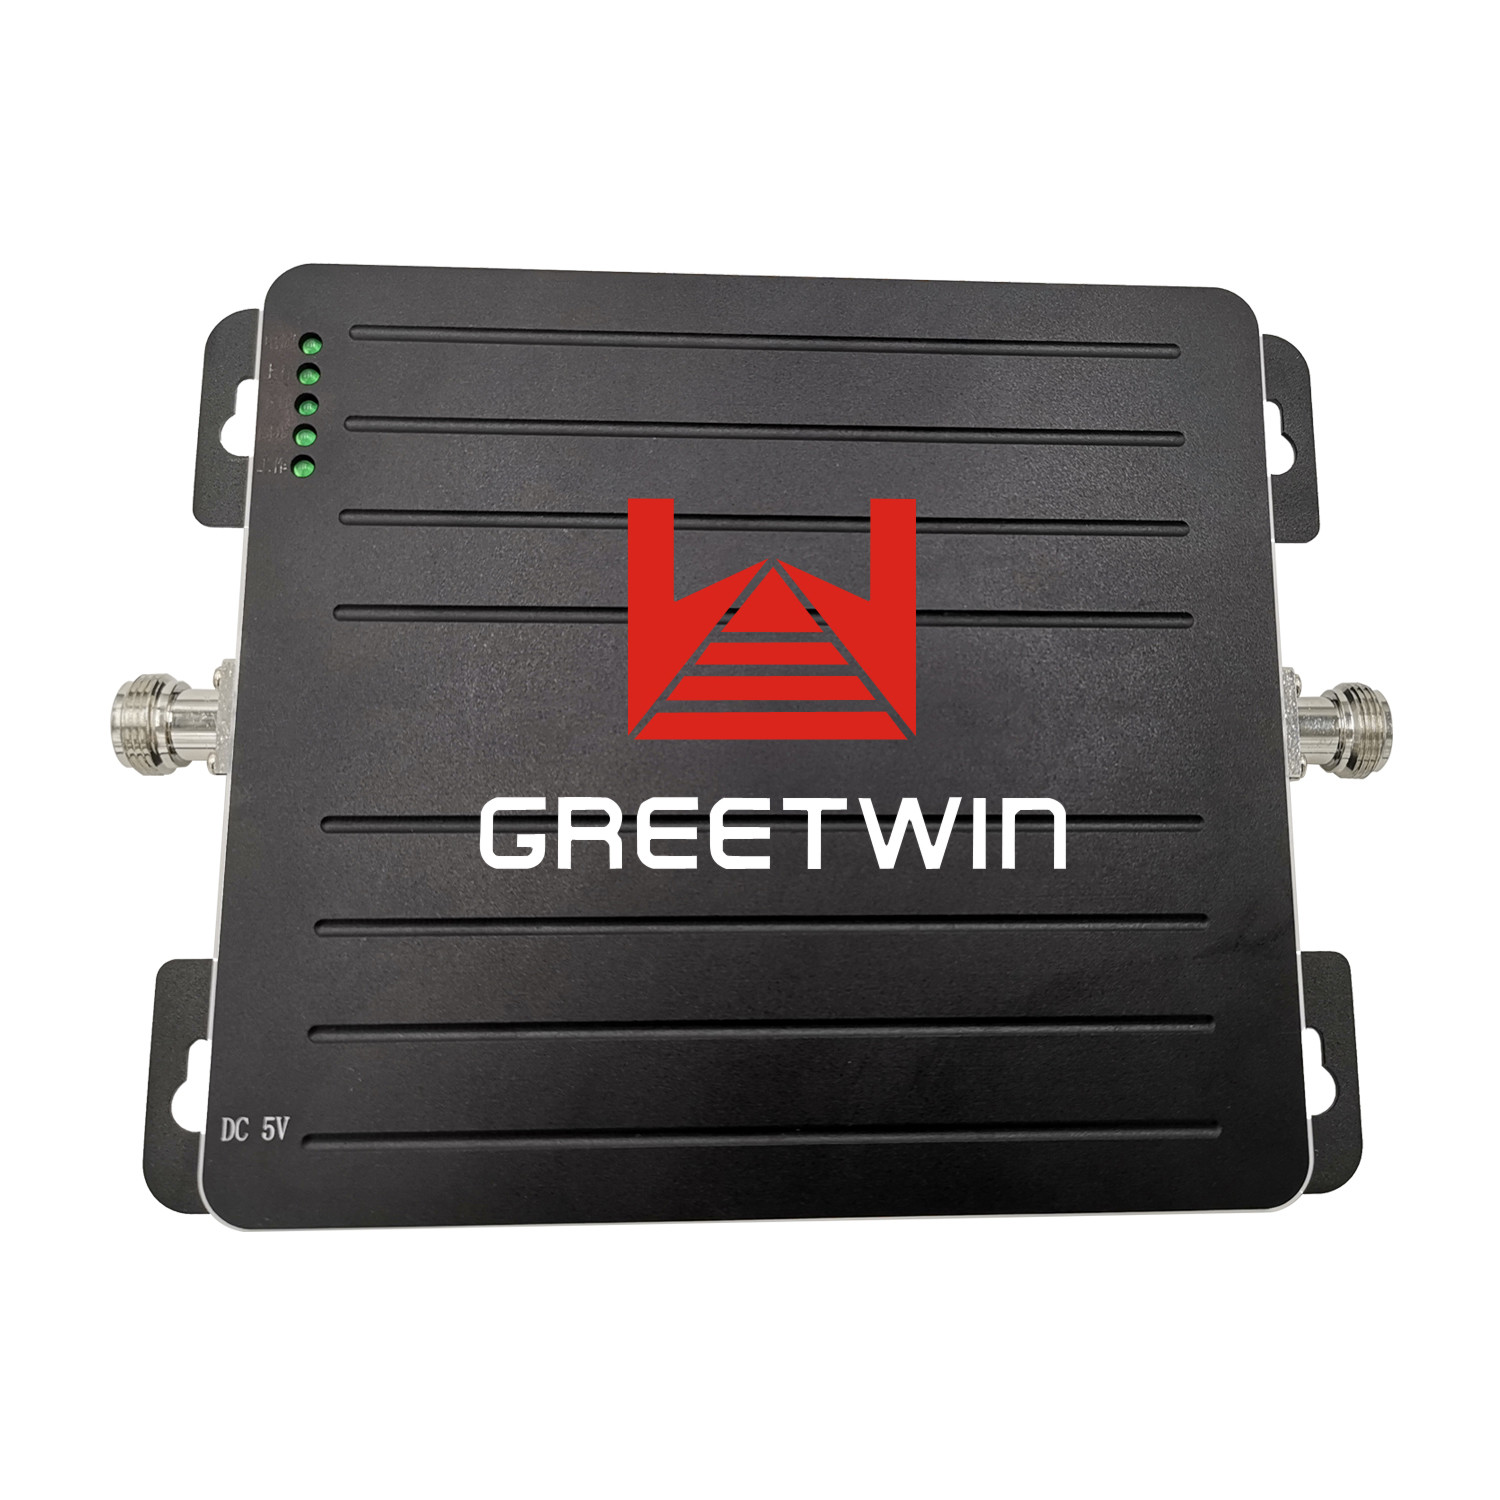 Dual Band 20dBm Powerful GSM900MHz LTE2300MHz Cellular Signal Booster 2G 3G 4G Phone Repeater